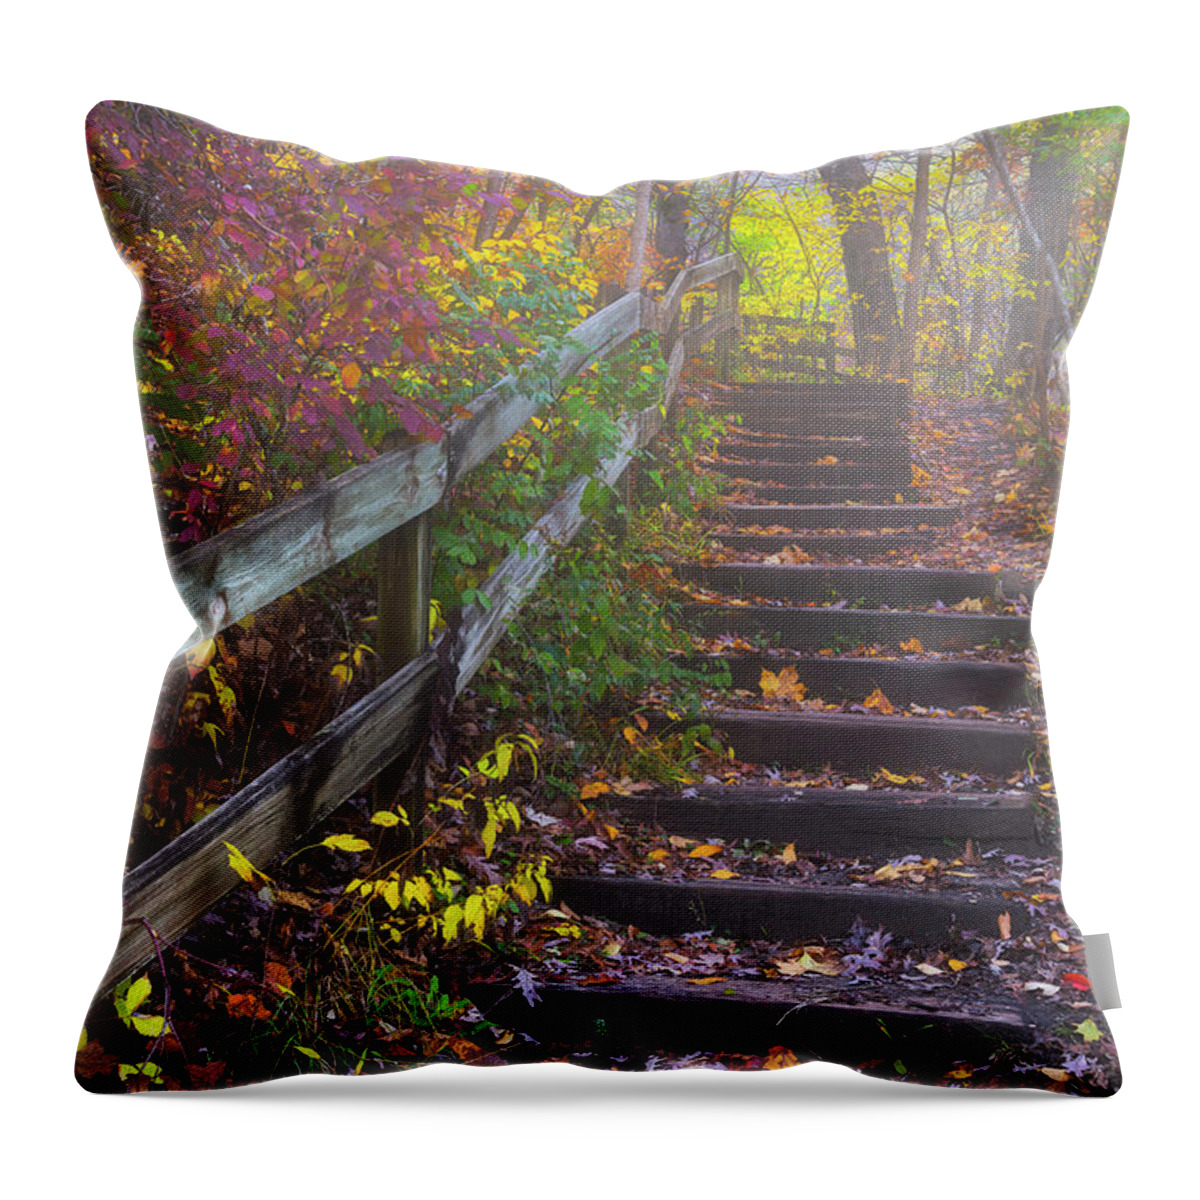 Stairway Throw Pillow featuring the photograph Stairway to Autumn by Darren White